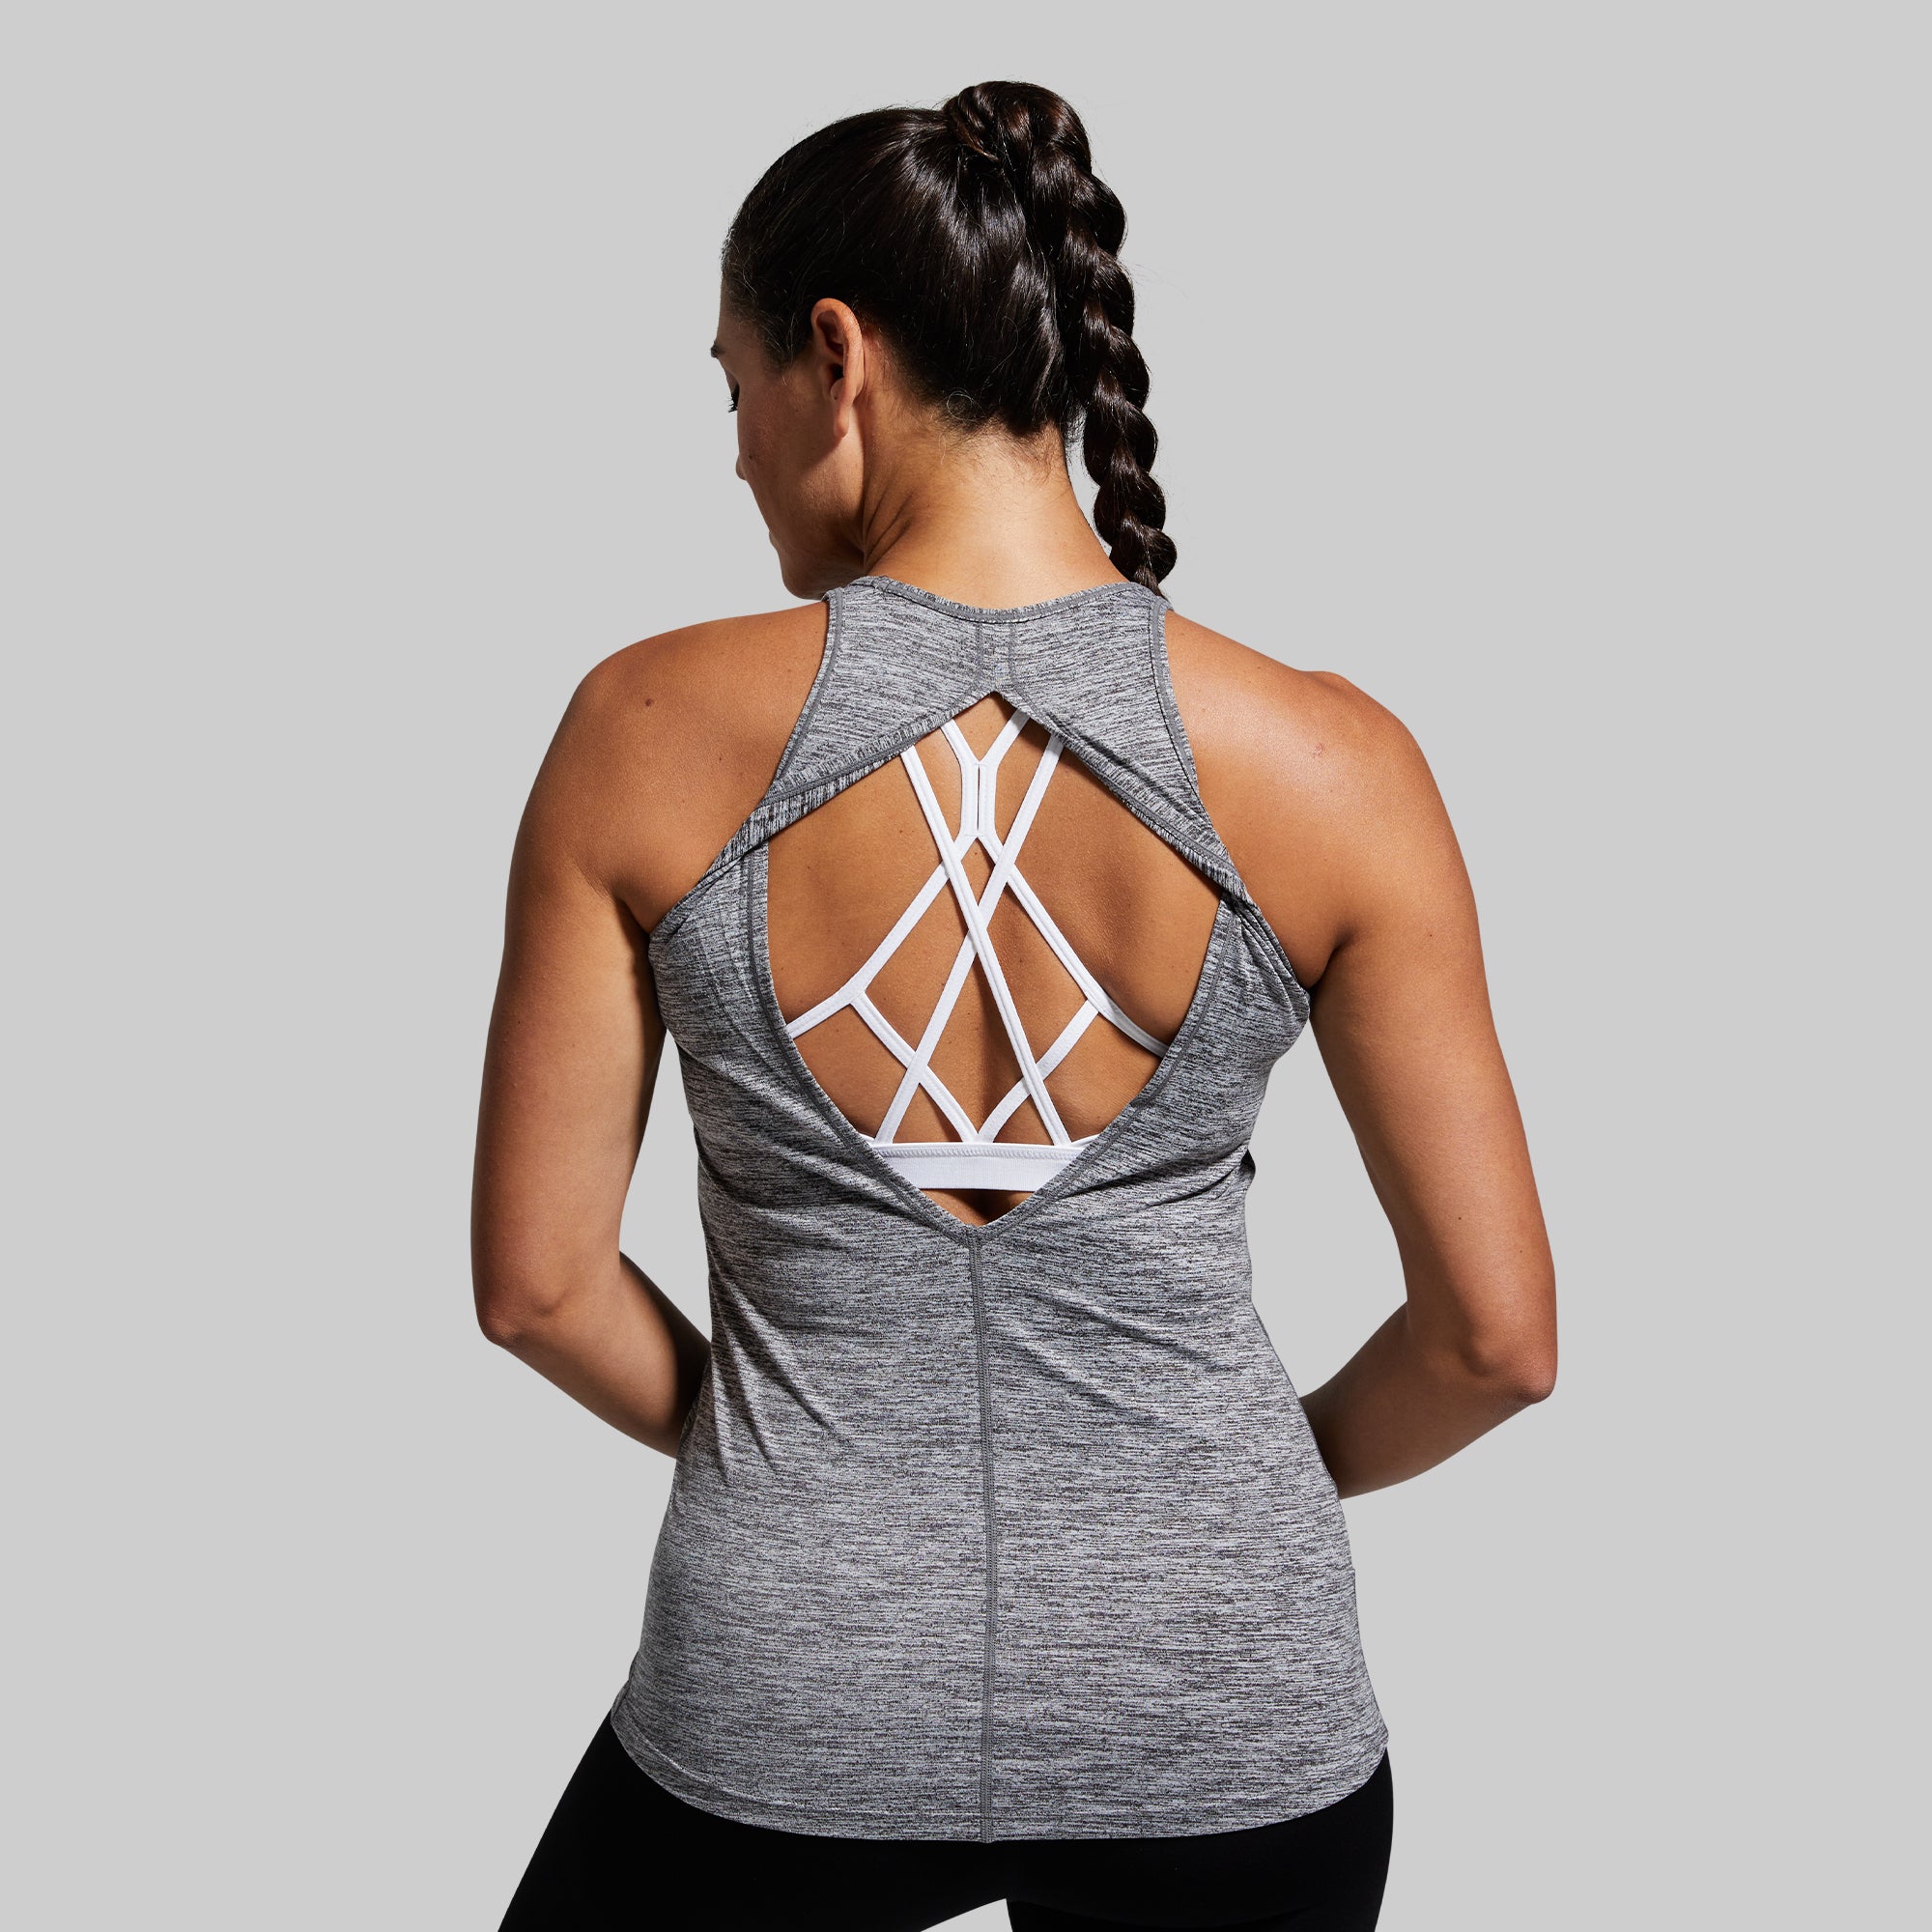 Women's Workout Racerback Tank Tri-Blend SKILL SKULL E-store   - Polish manufacturer of sportswear for fitness, Crossfit, gym, running.  Quick delivery and easy return and exchange